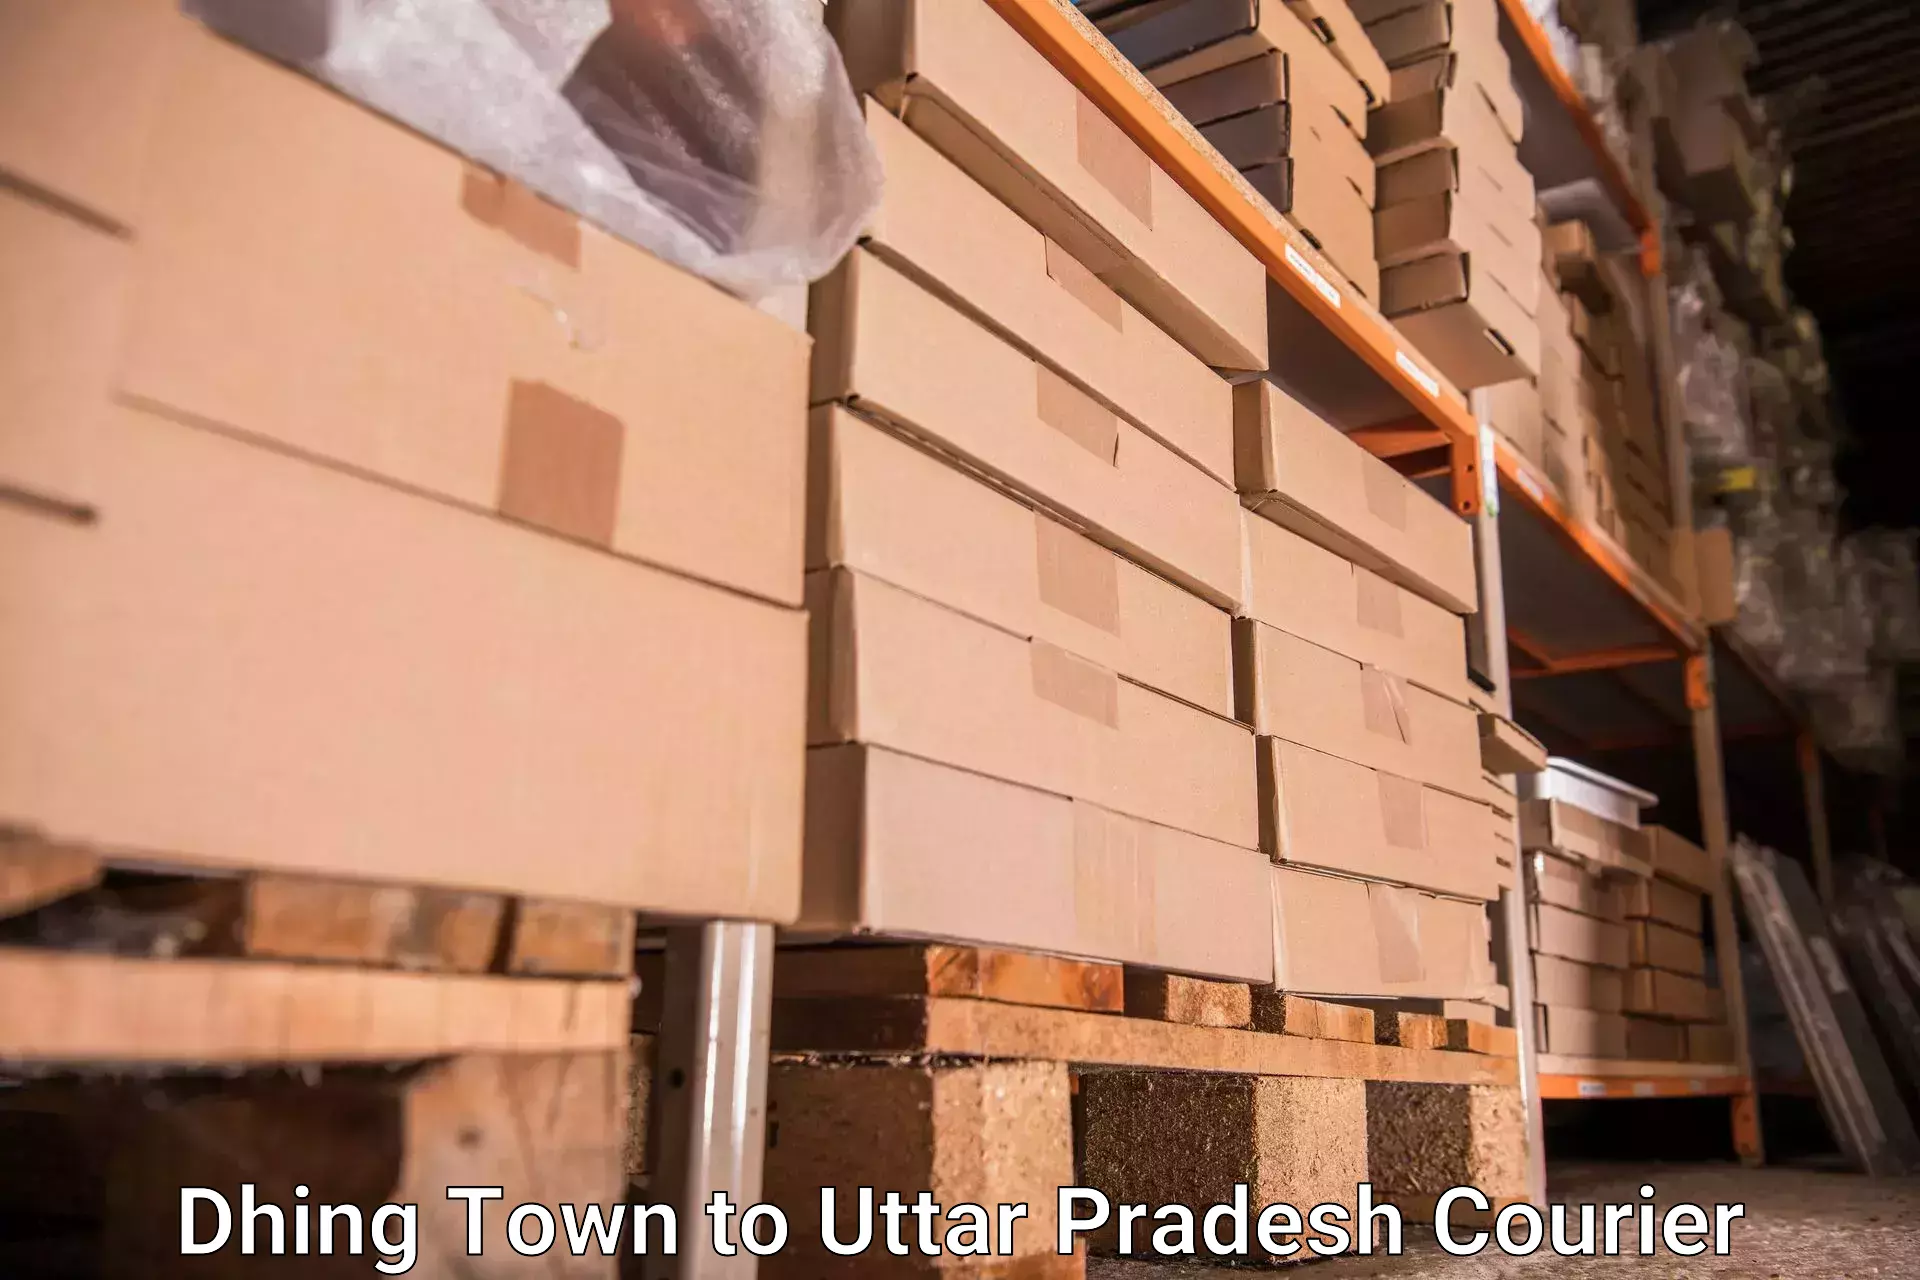 Baggage delivery technology Dhing Town to Mirzapur